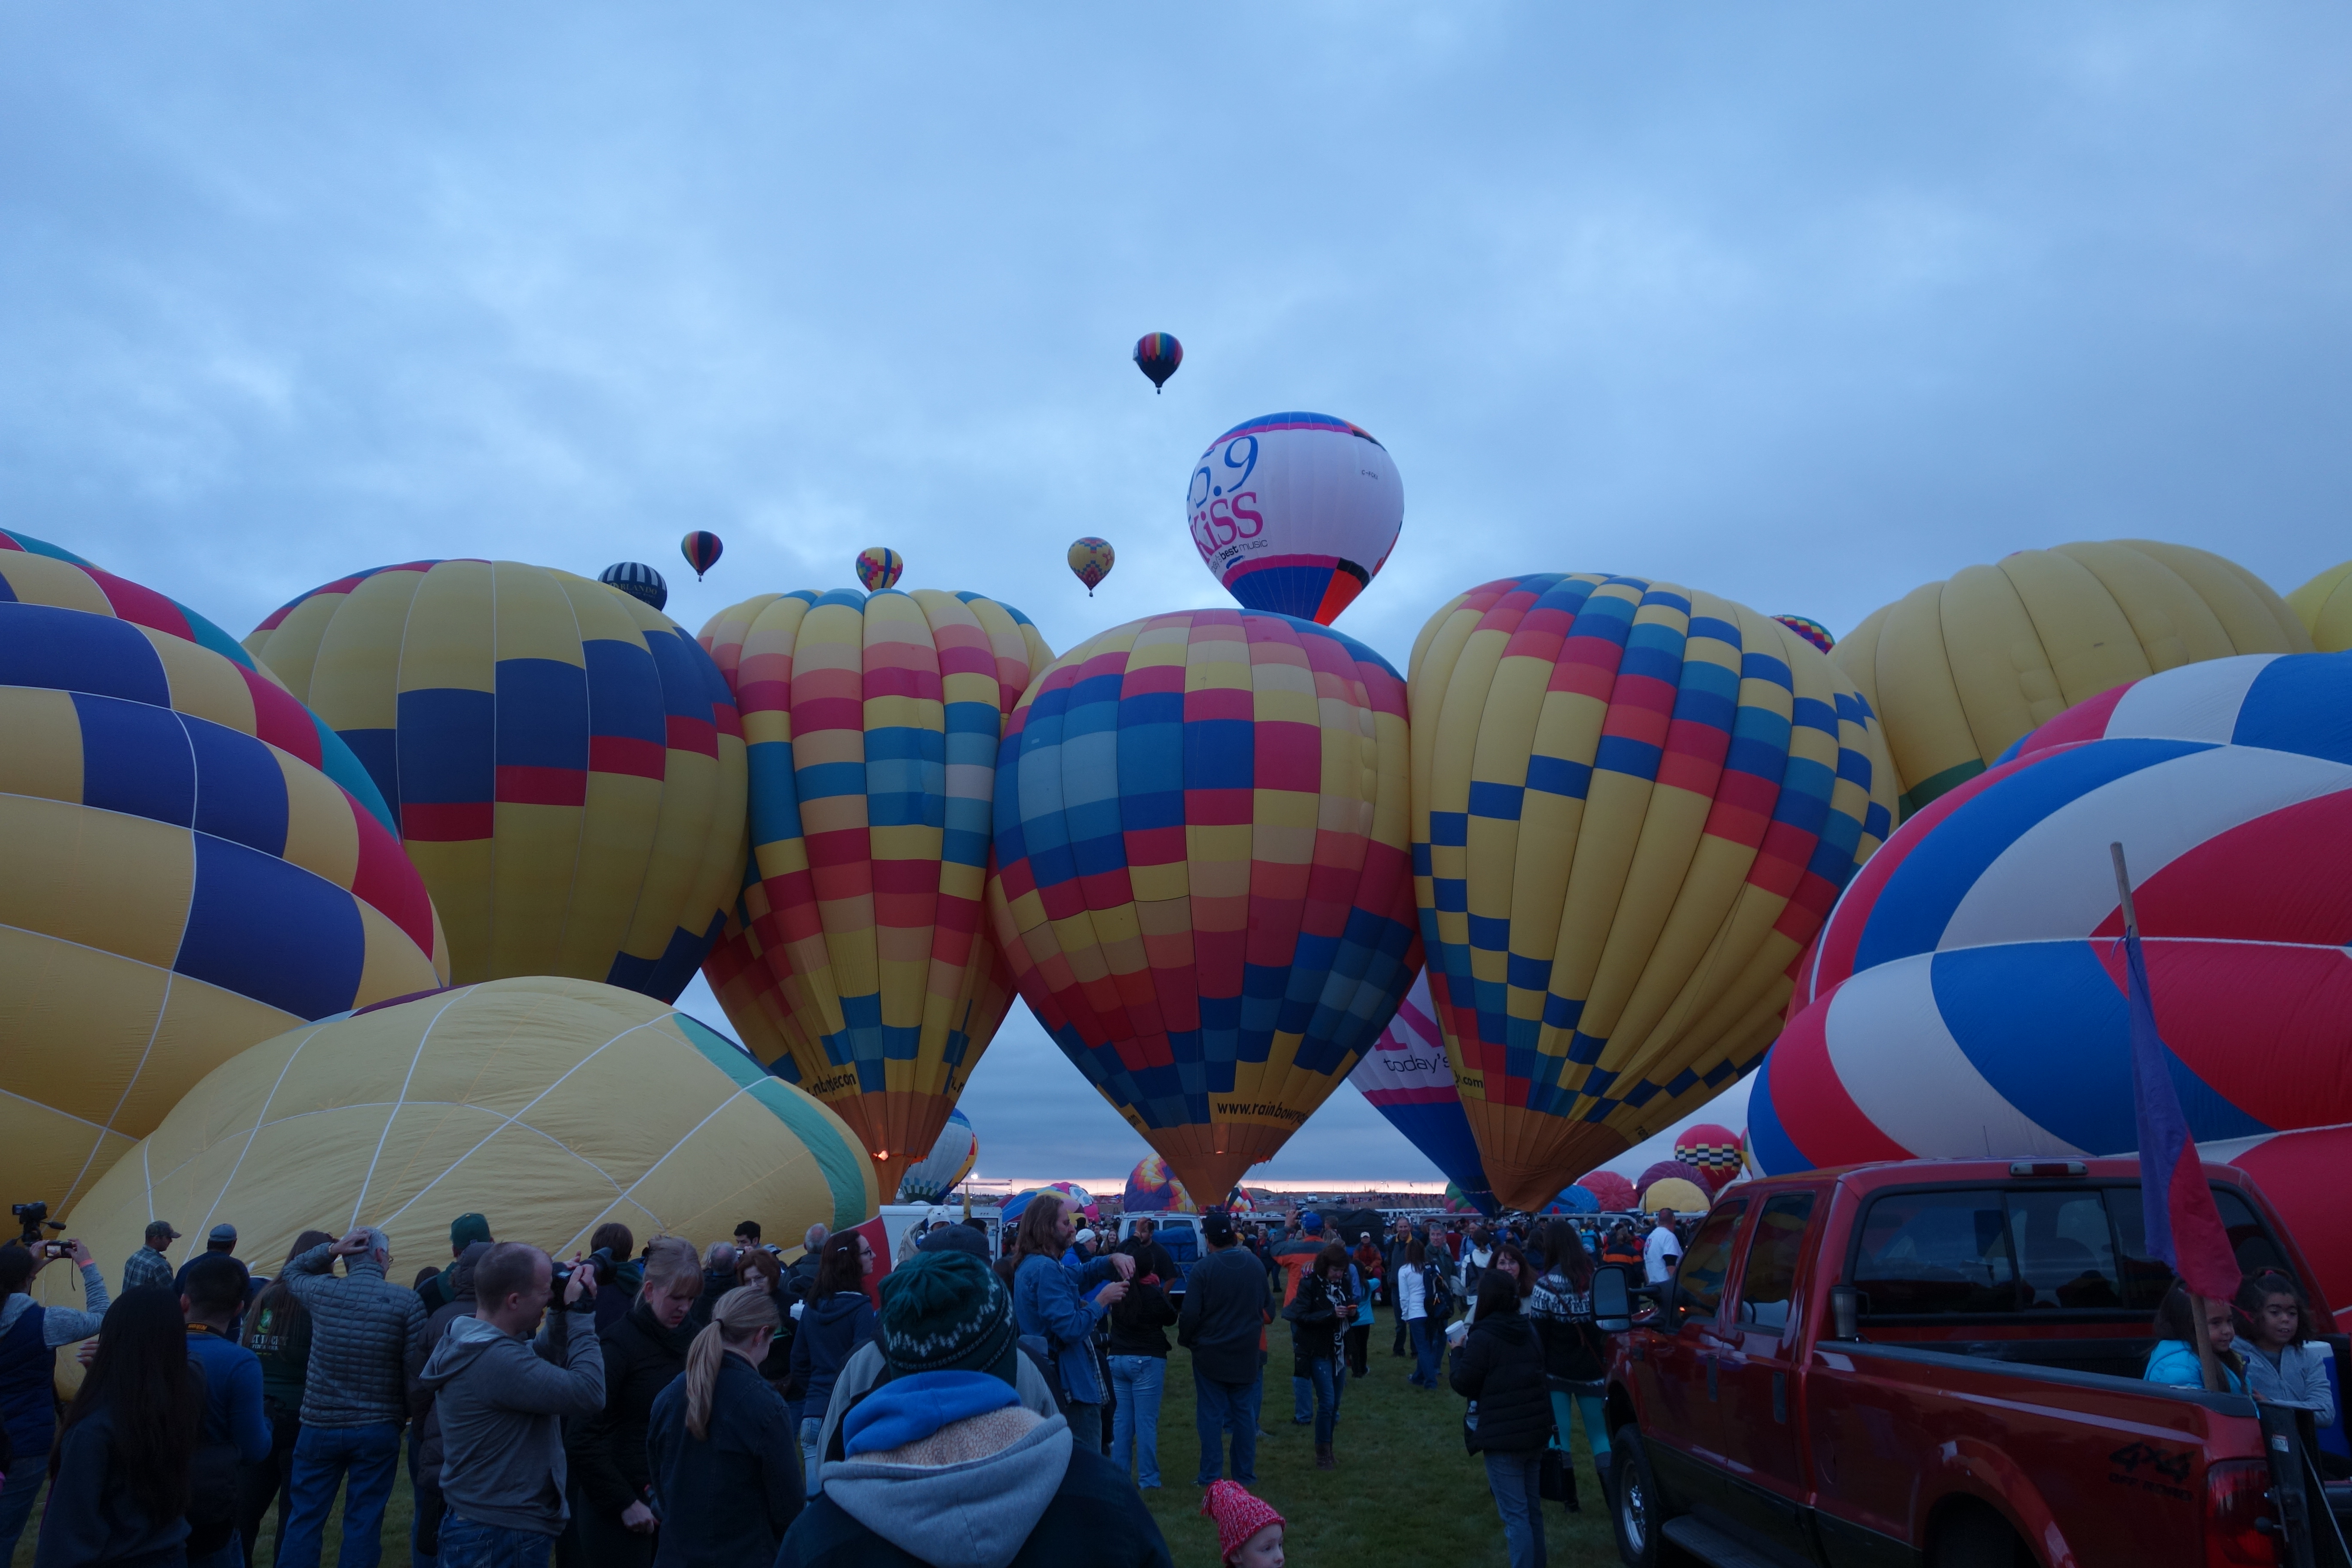 Row of hot air balloons very close together